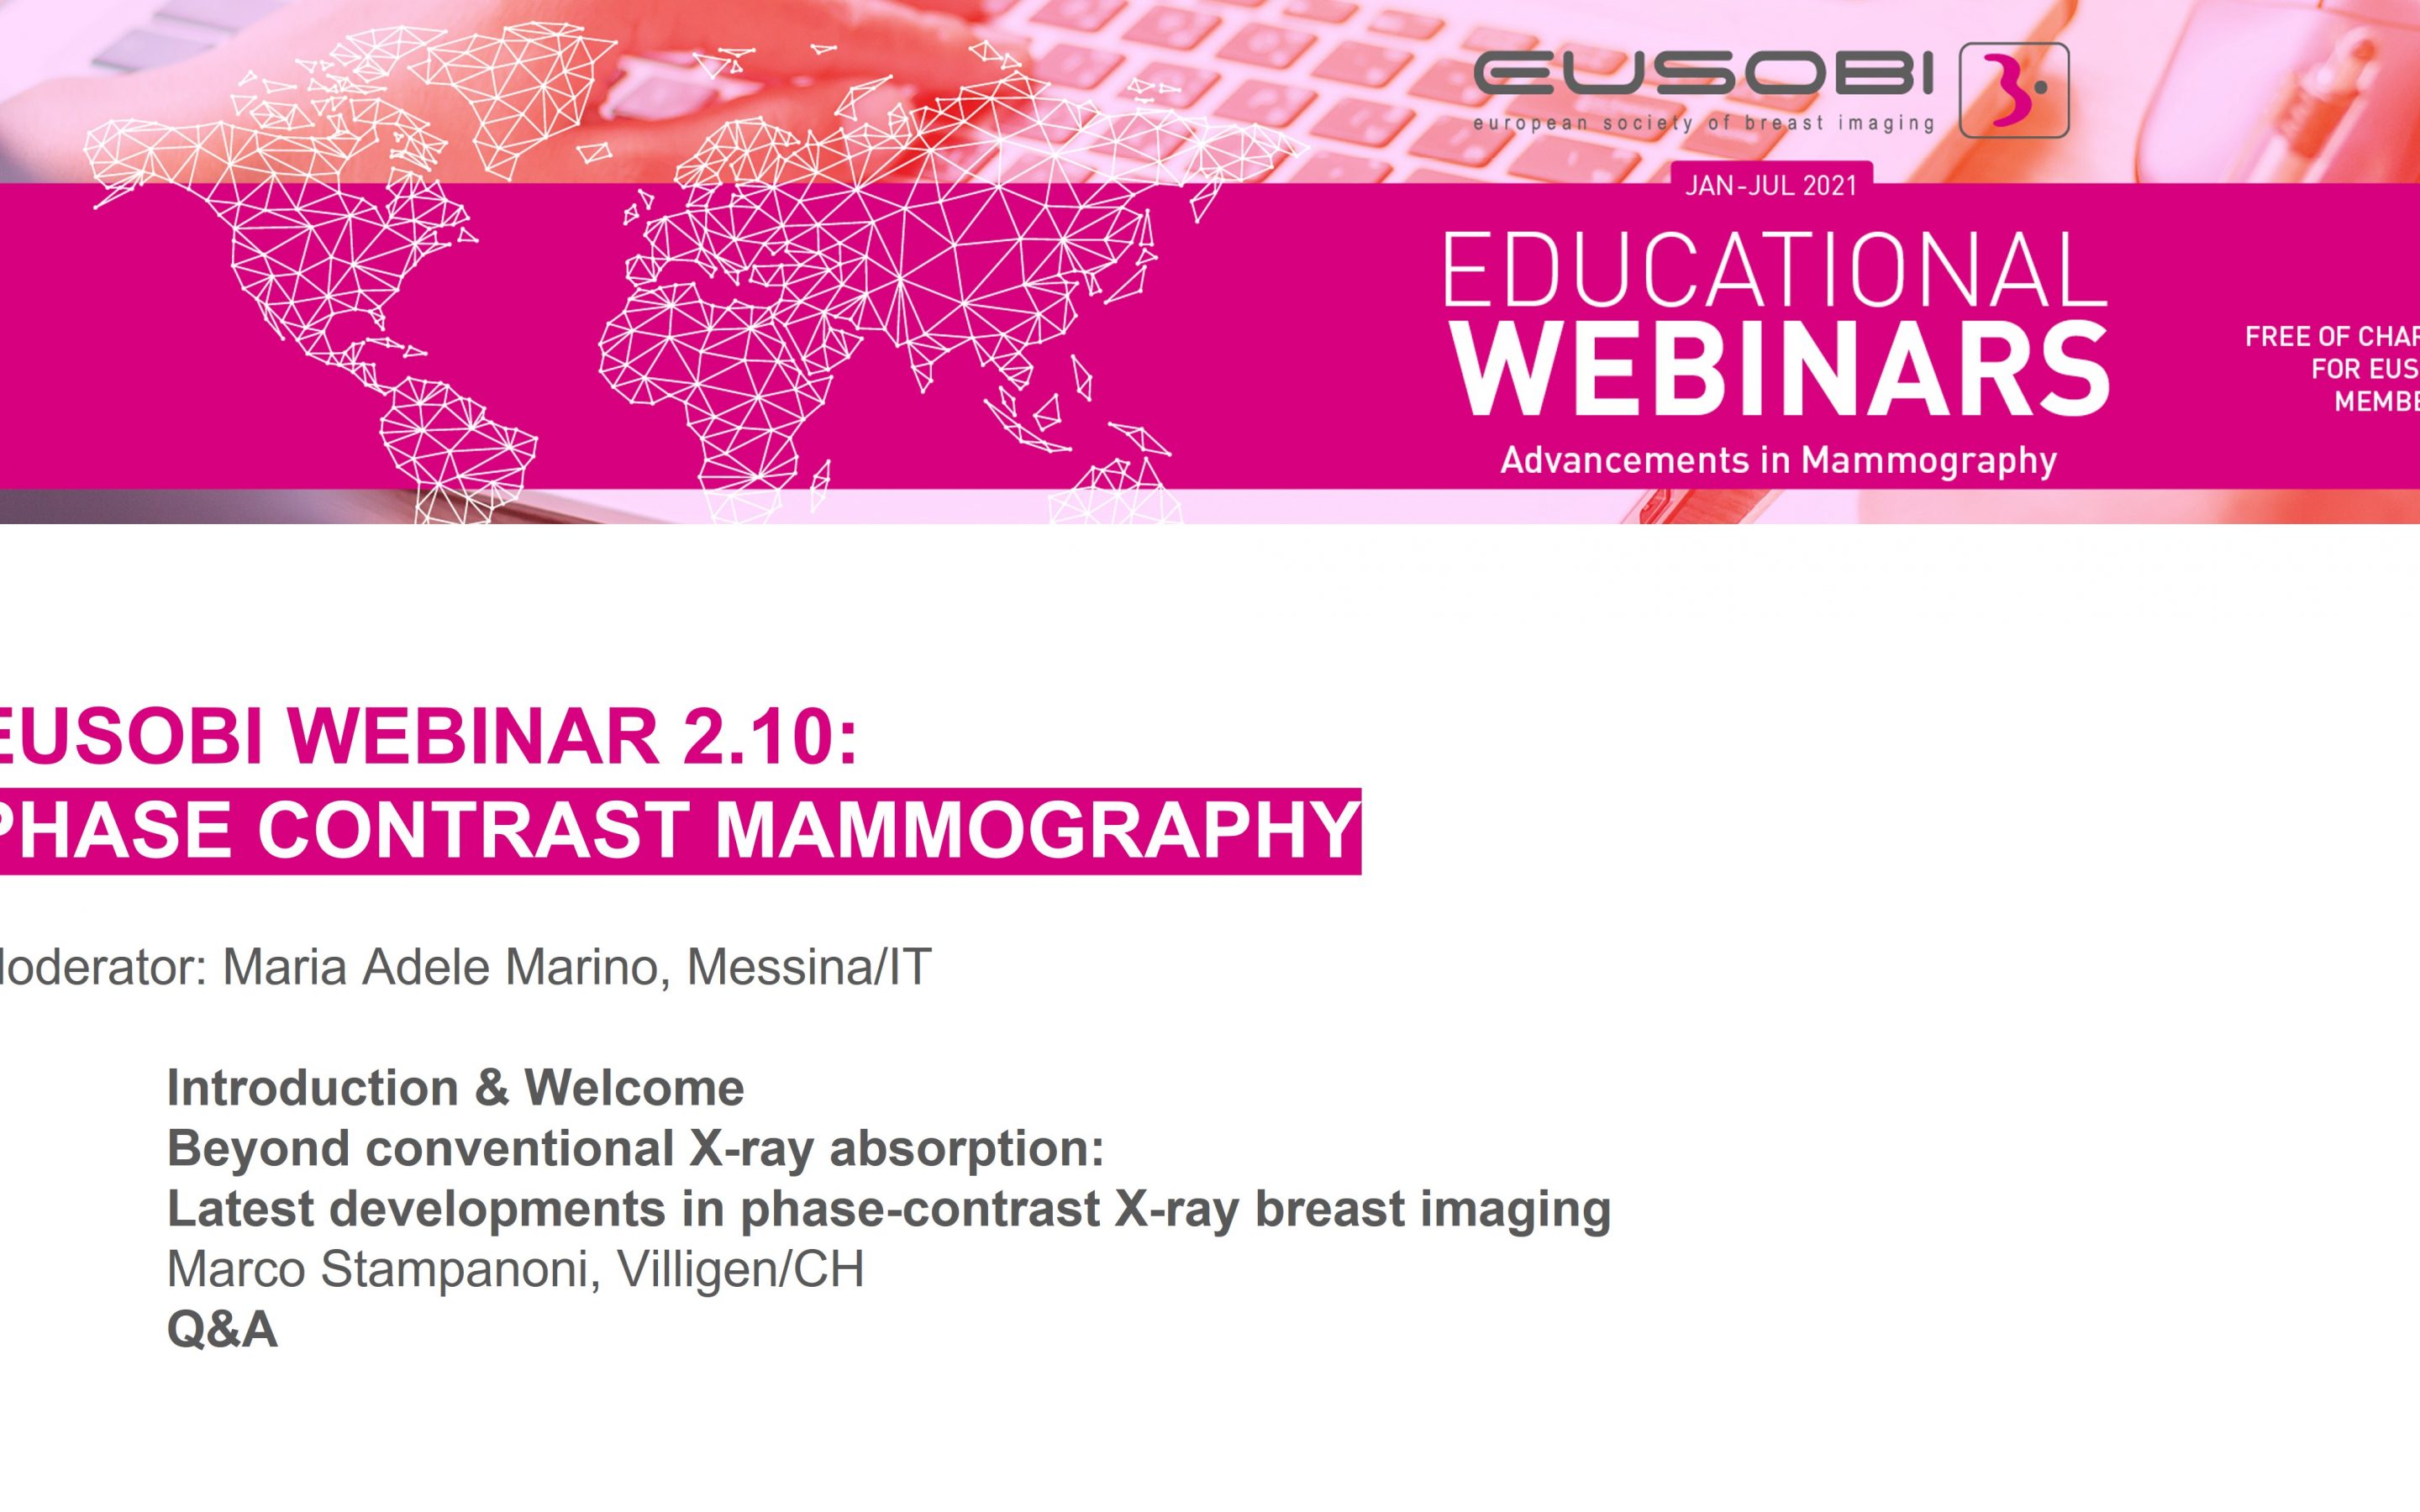 2.10 / Phase Contrast Mammography